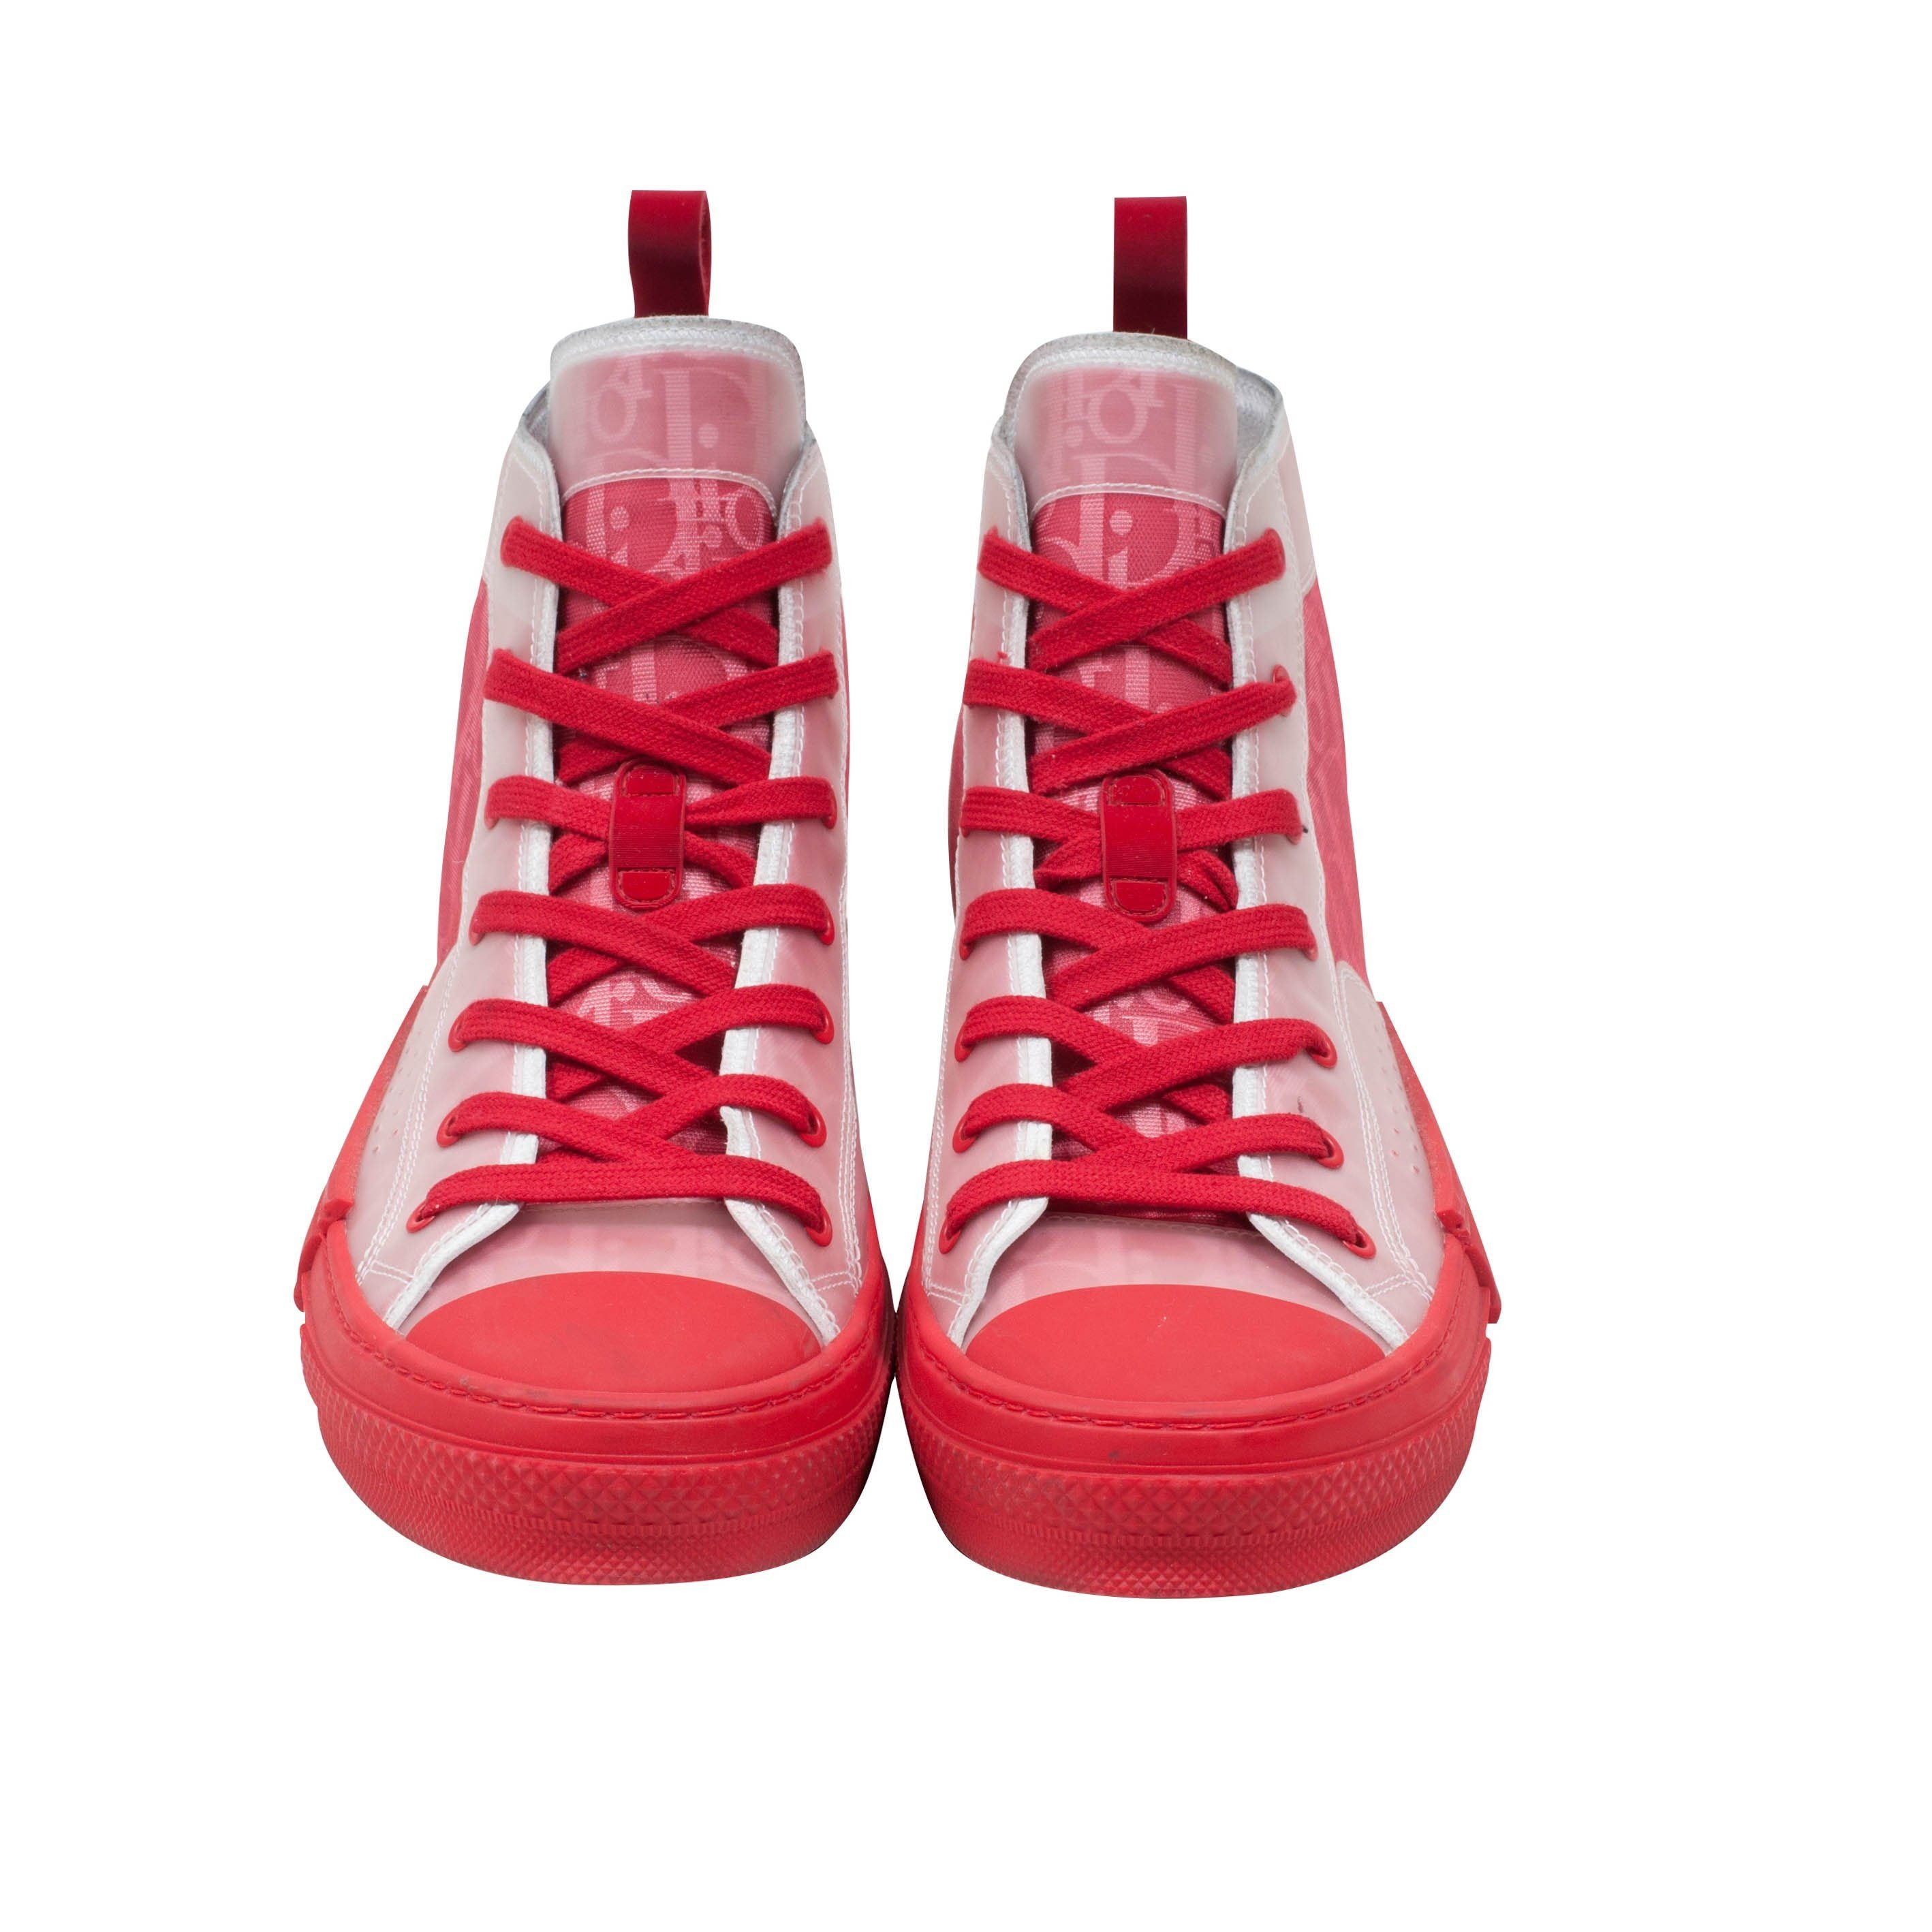 Mens Luxury Sneakers  Dior B27 high top sneakers in white and red